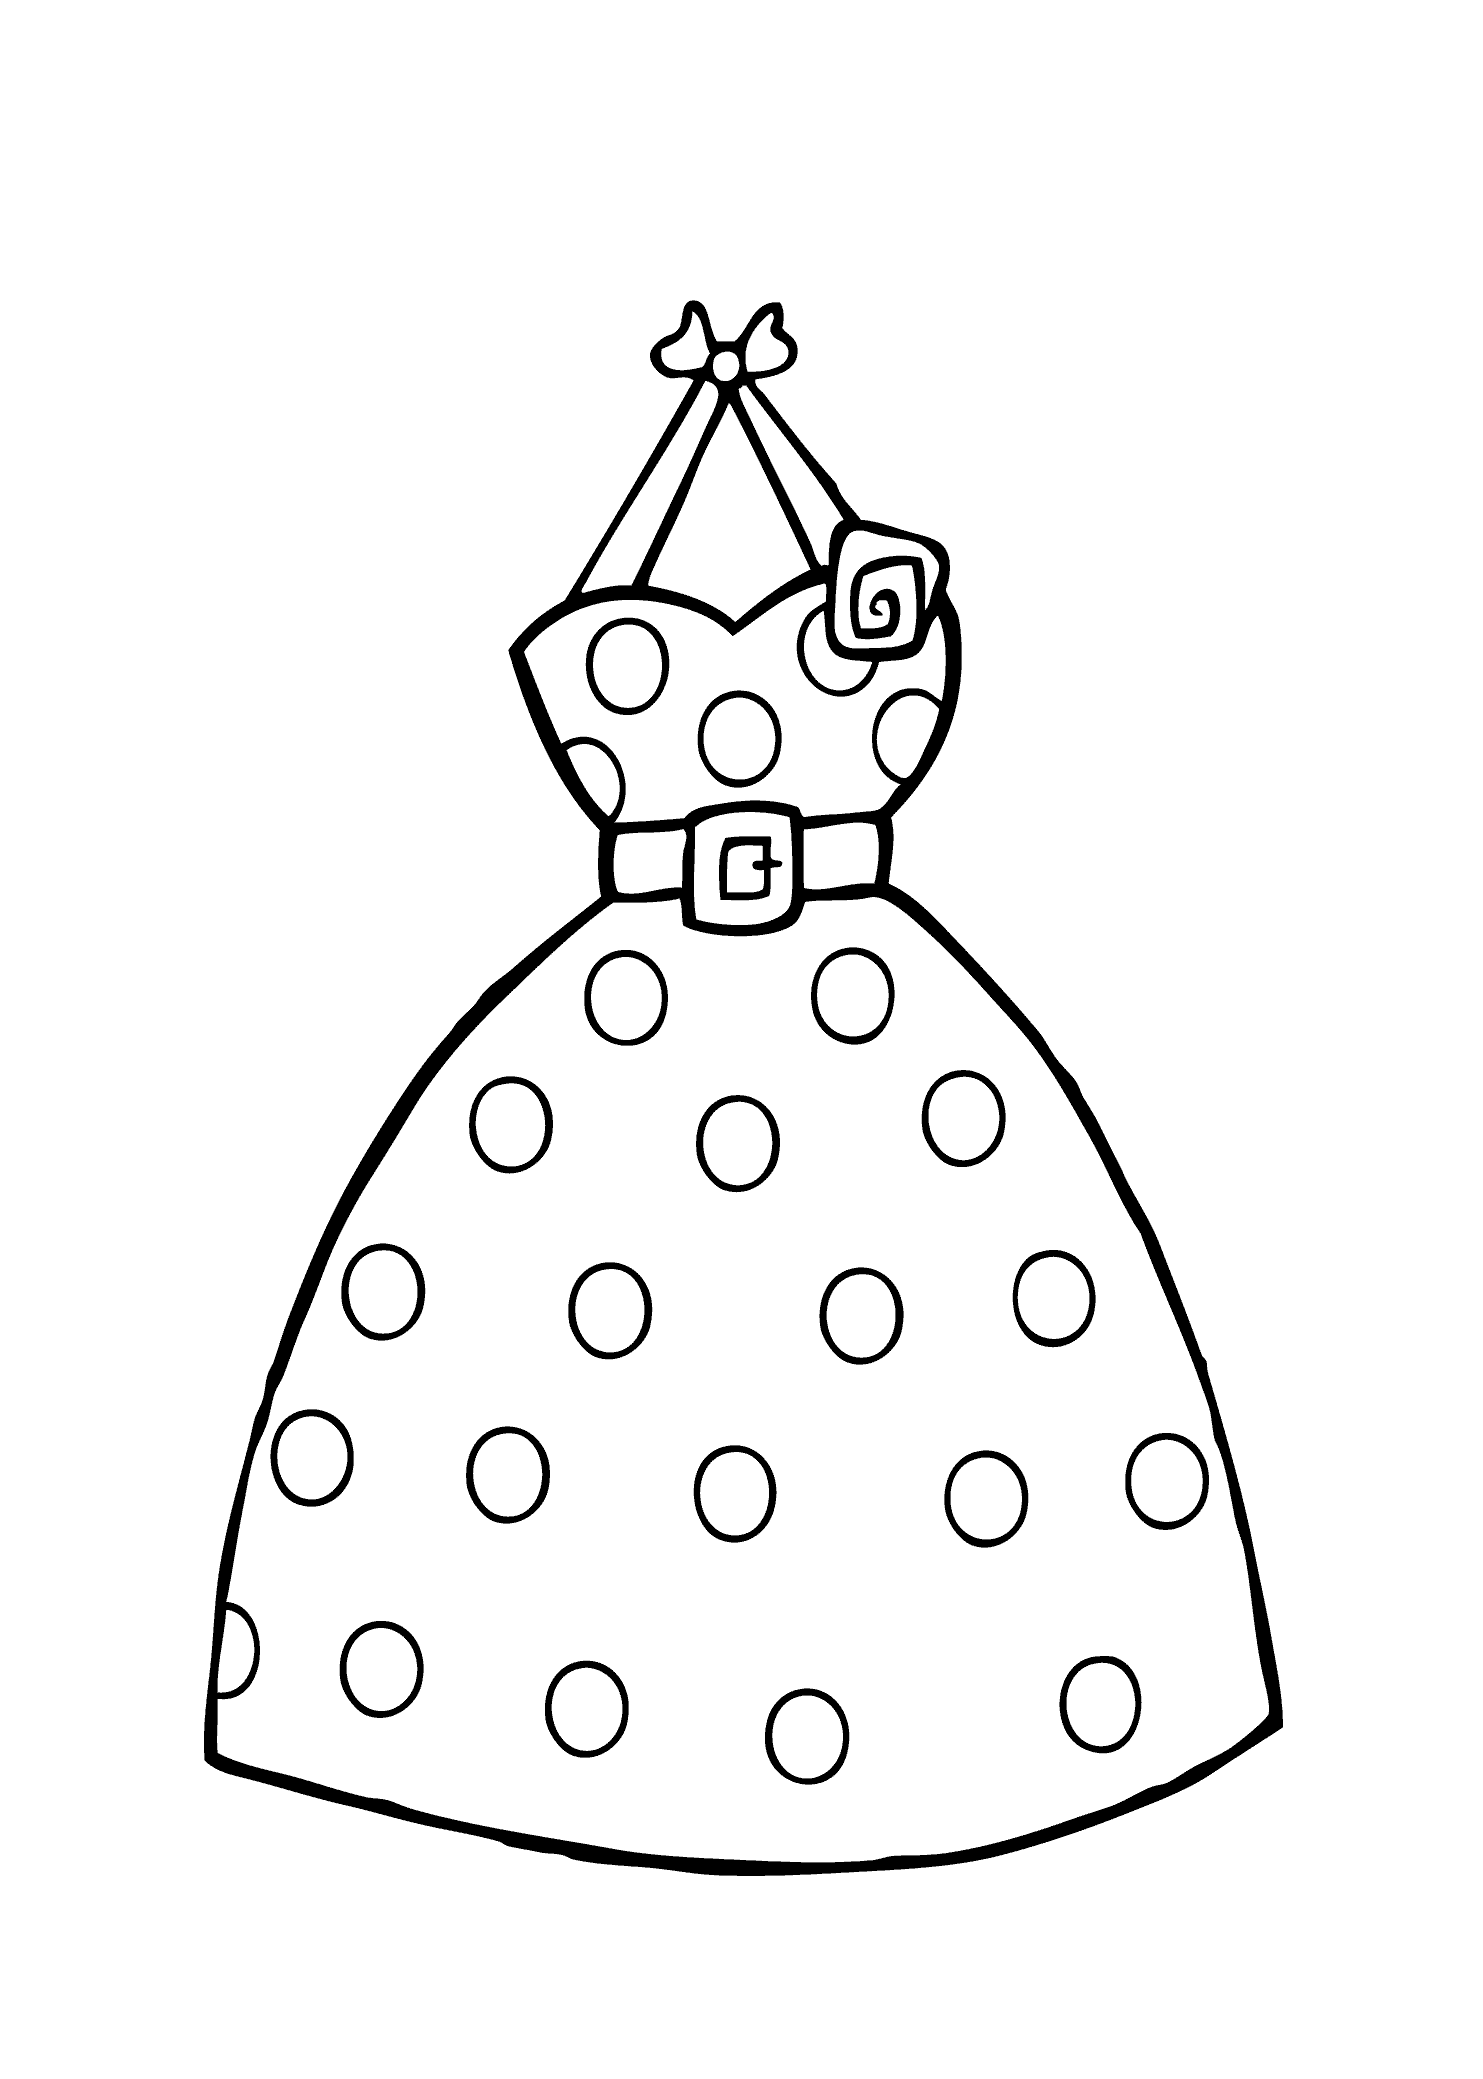 colouring clothes dress coloring pages to download and print for free clothes colouring 